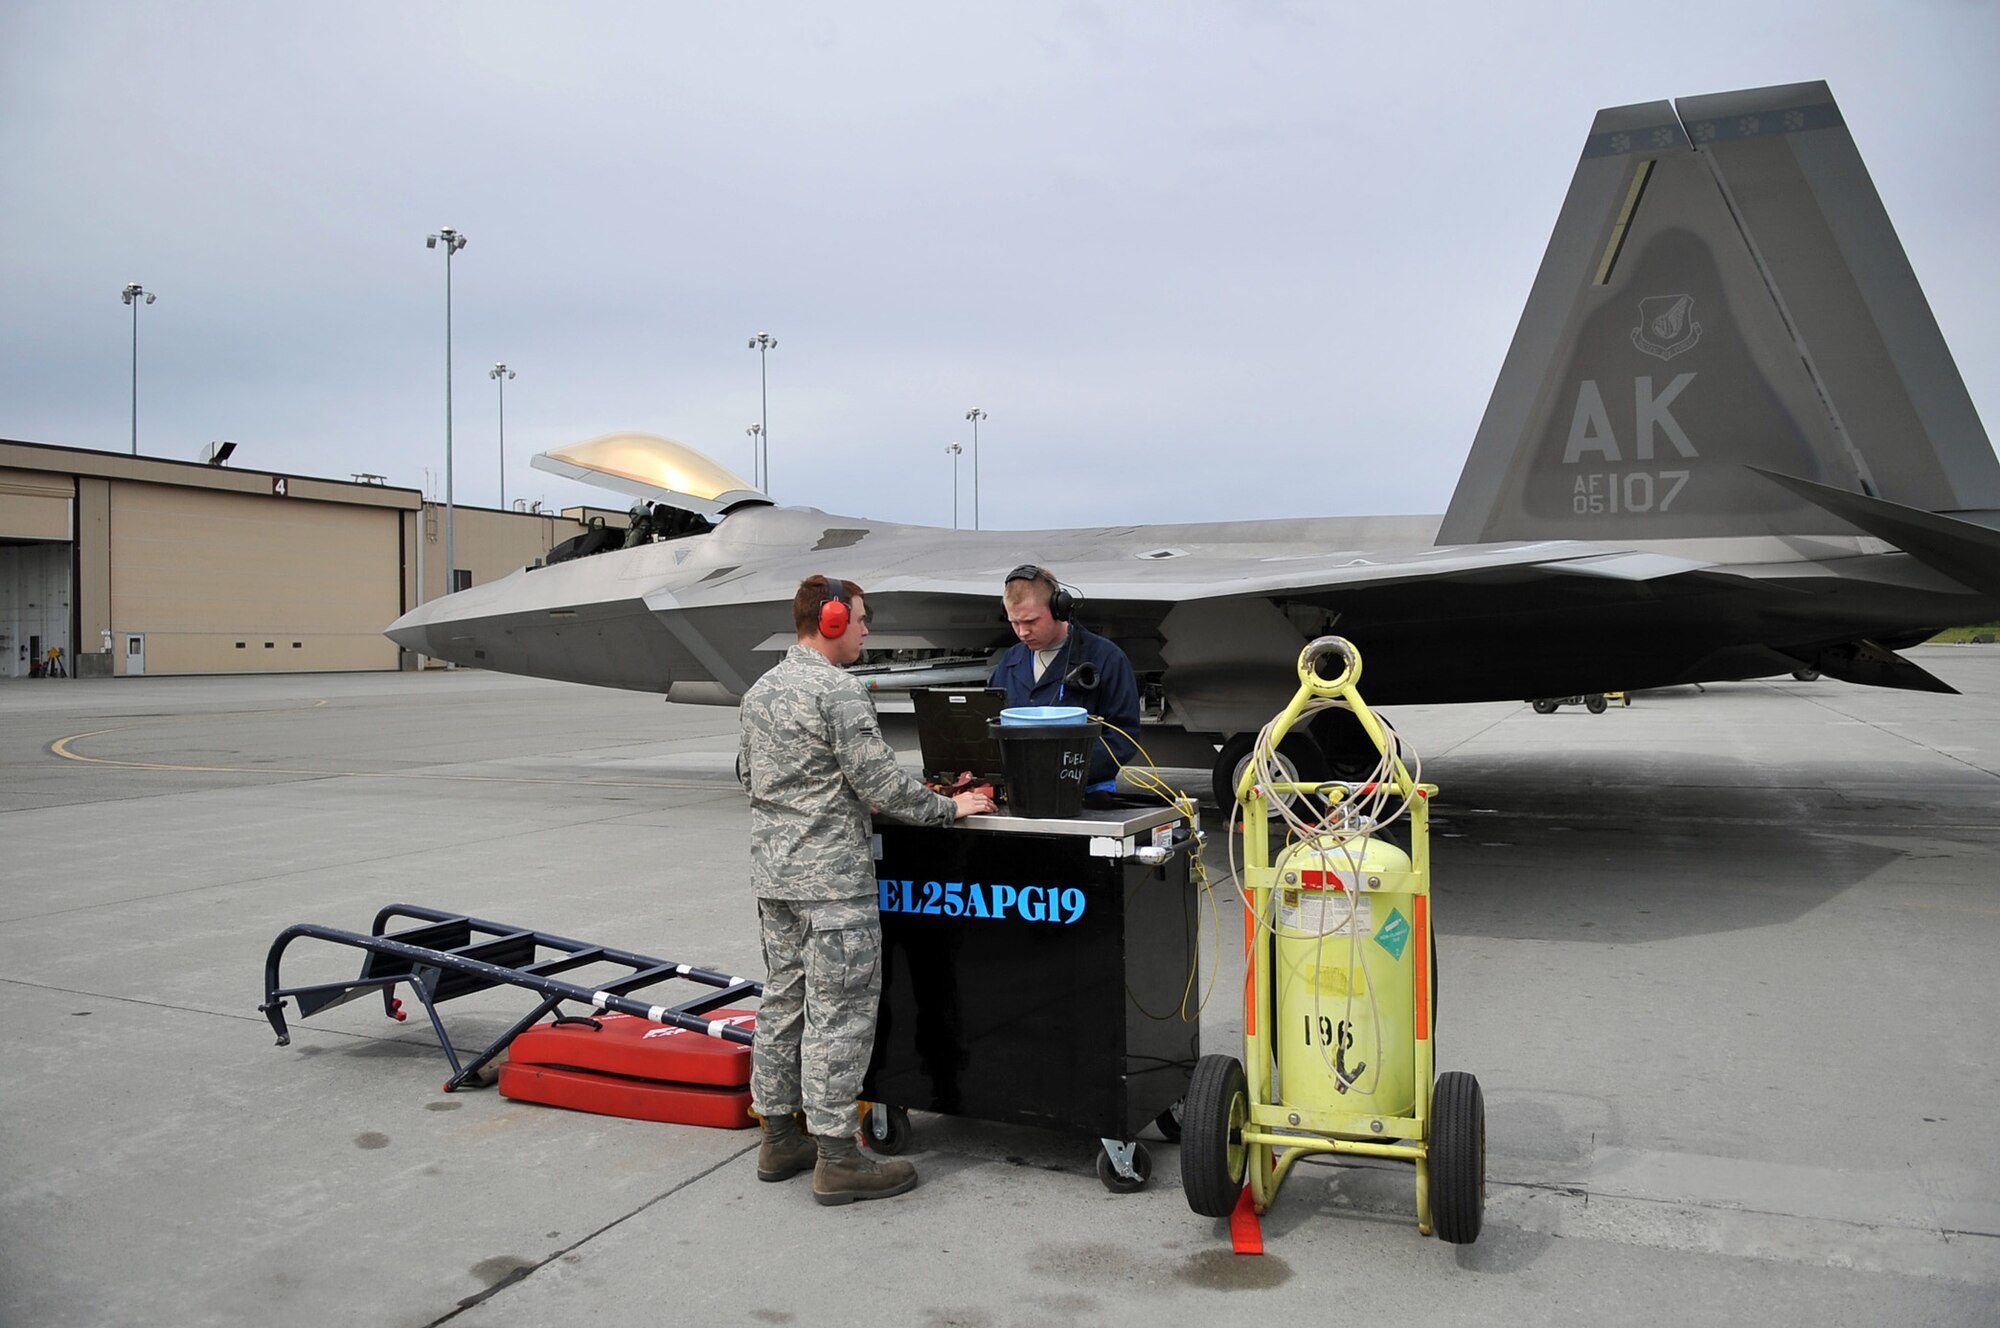 Airmen 1st Class Benjamin Keller and Shane Brewster prepare to launch their F-22 Raptor fighter aircraft for a mission June 17, 2009, during Northern Edge 09 held at Elmendorf Air Force Base, Alaska. The Airmen are from the 90th Fighter Squadron and 525th Aircraft Maintenance Unit at Elmendorf AFB. Northern Edge is Alaska's largest military training exercise that prepares joint forces to respond to crises throughout the Asia-Pacific region. (U.S. Air Force photo/Master Sgt. Shane A. Cuomo)
